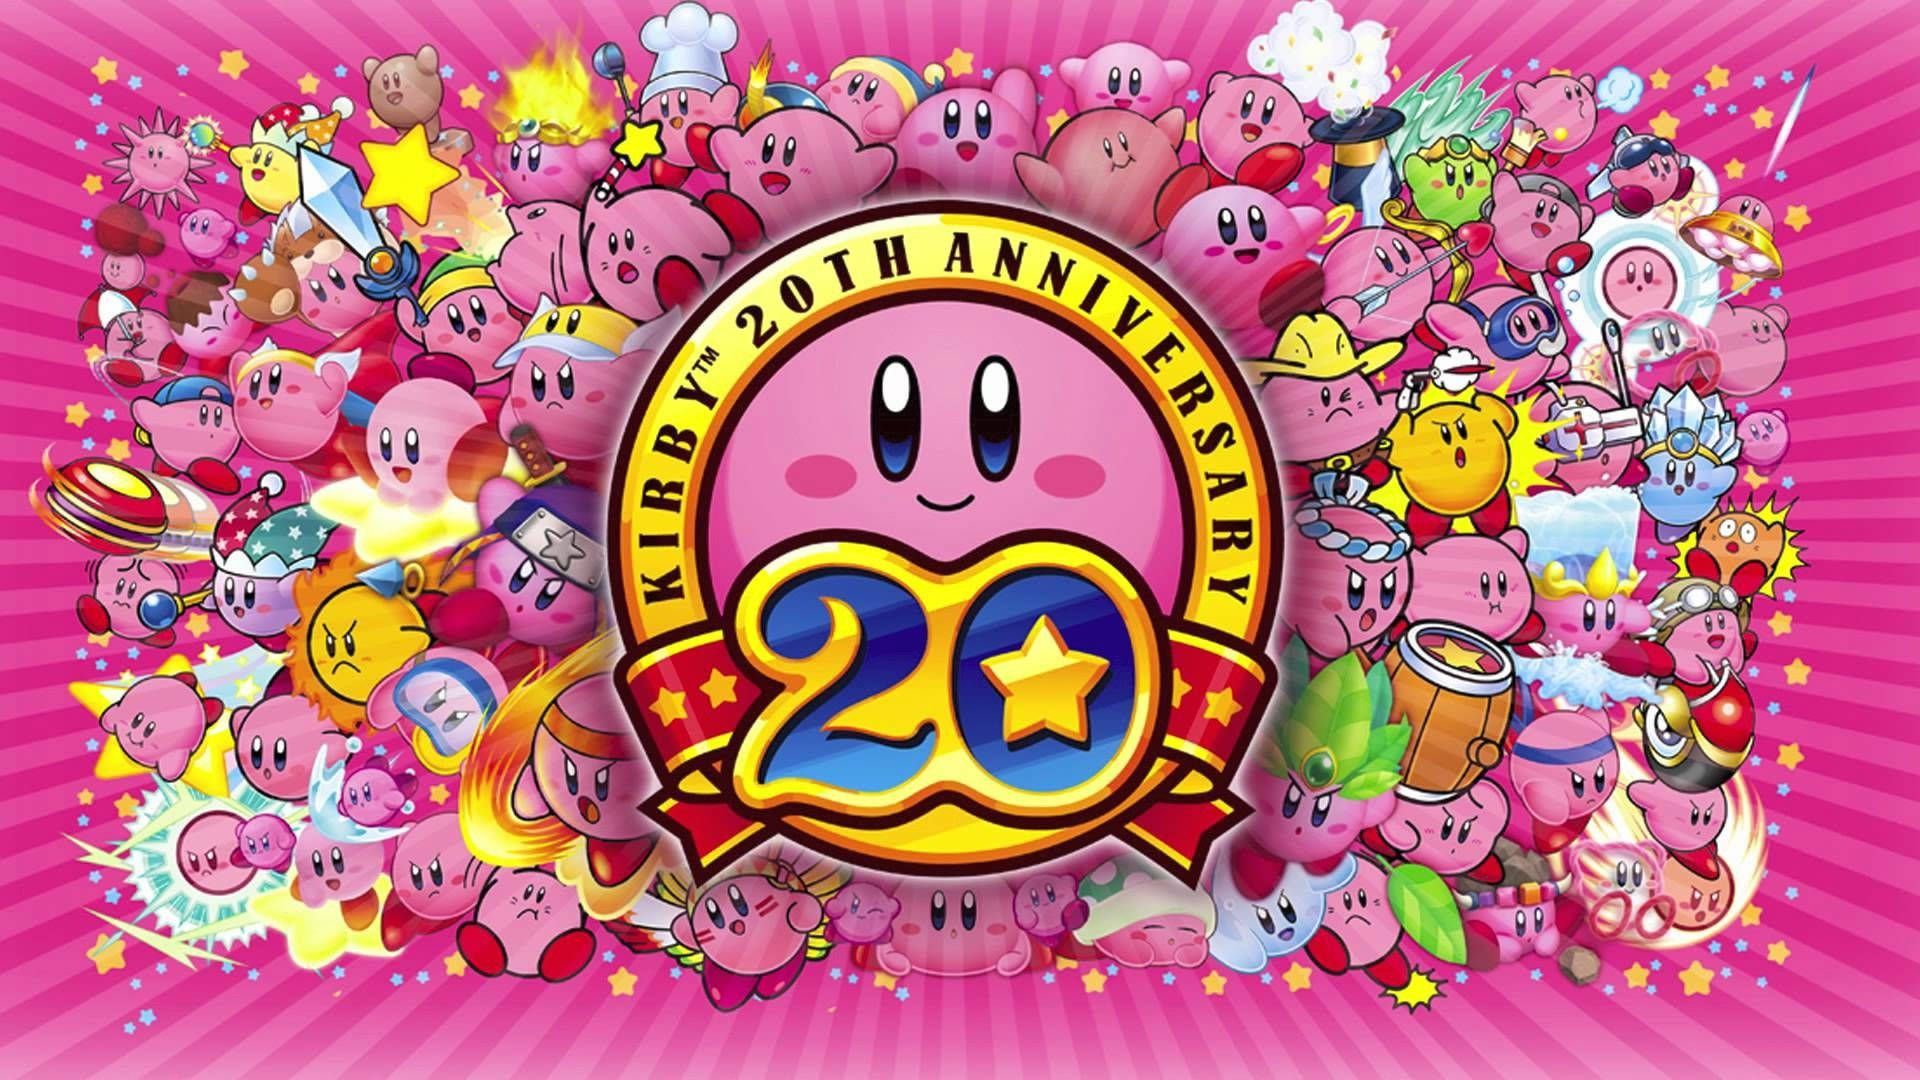 Hd Anniversary Cover Of Kirby Wallpaper